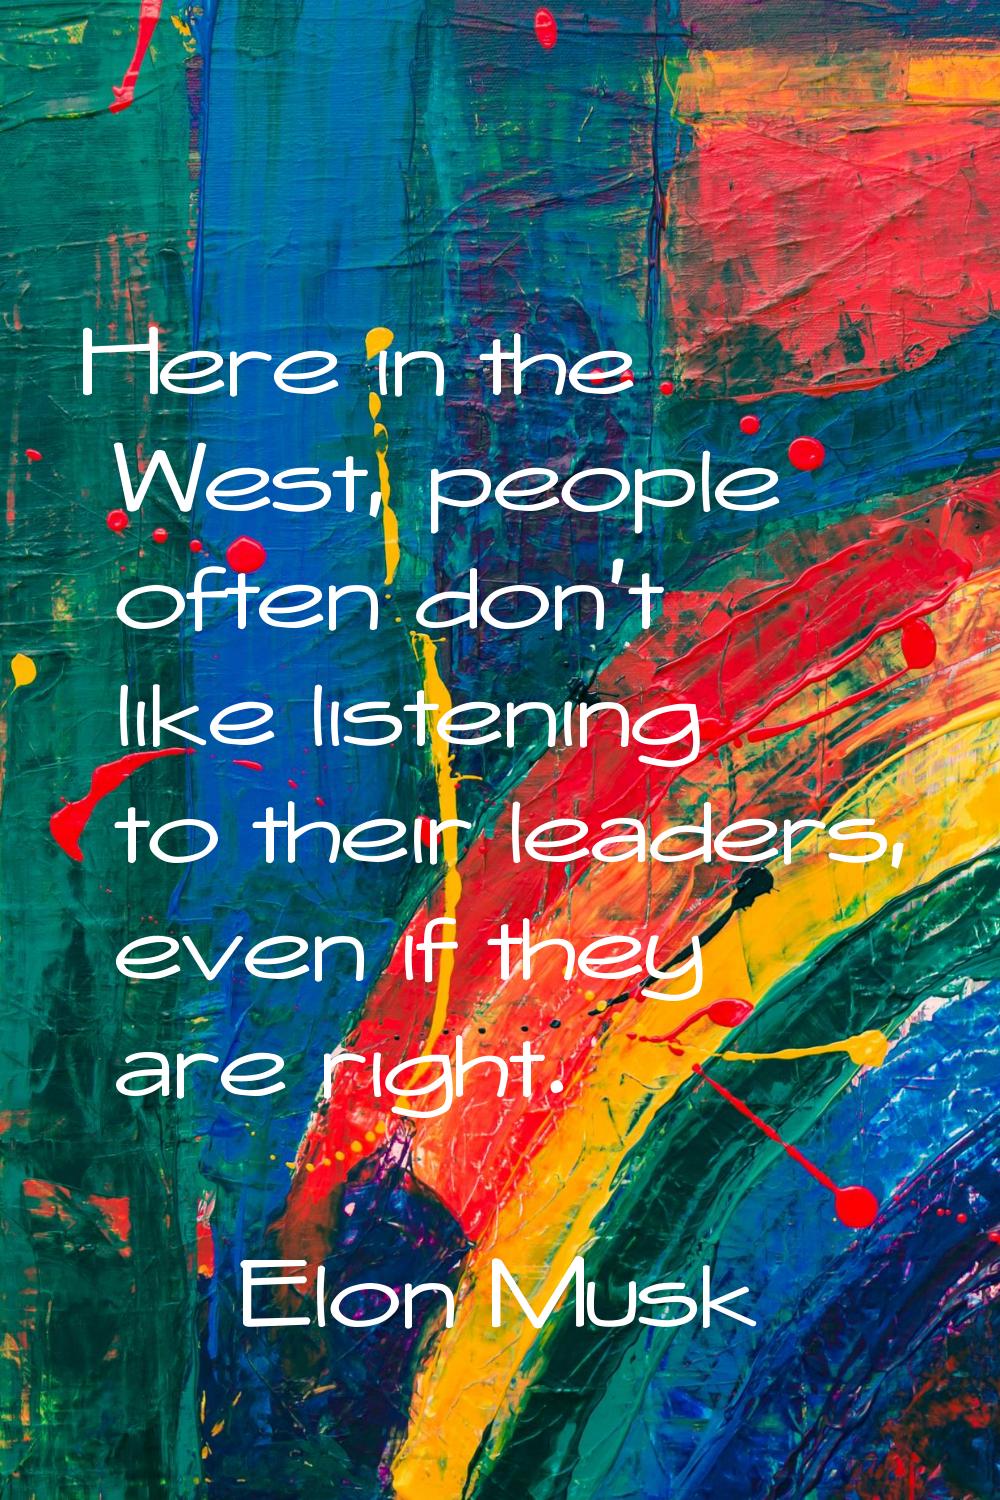 Here in the West, people often don't like listening to their leaders, even if they are right.